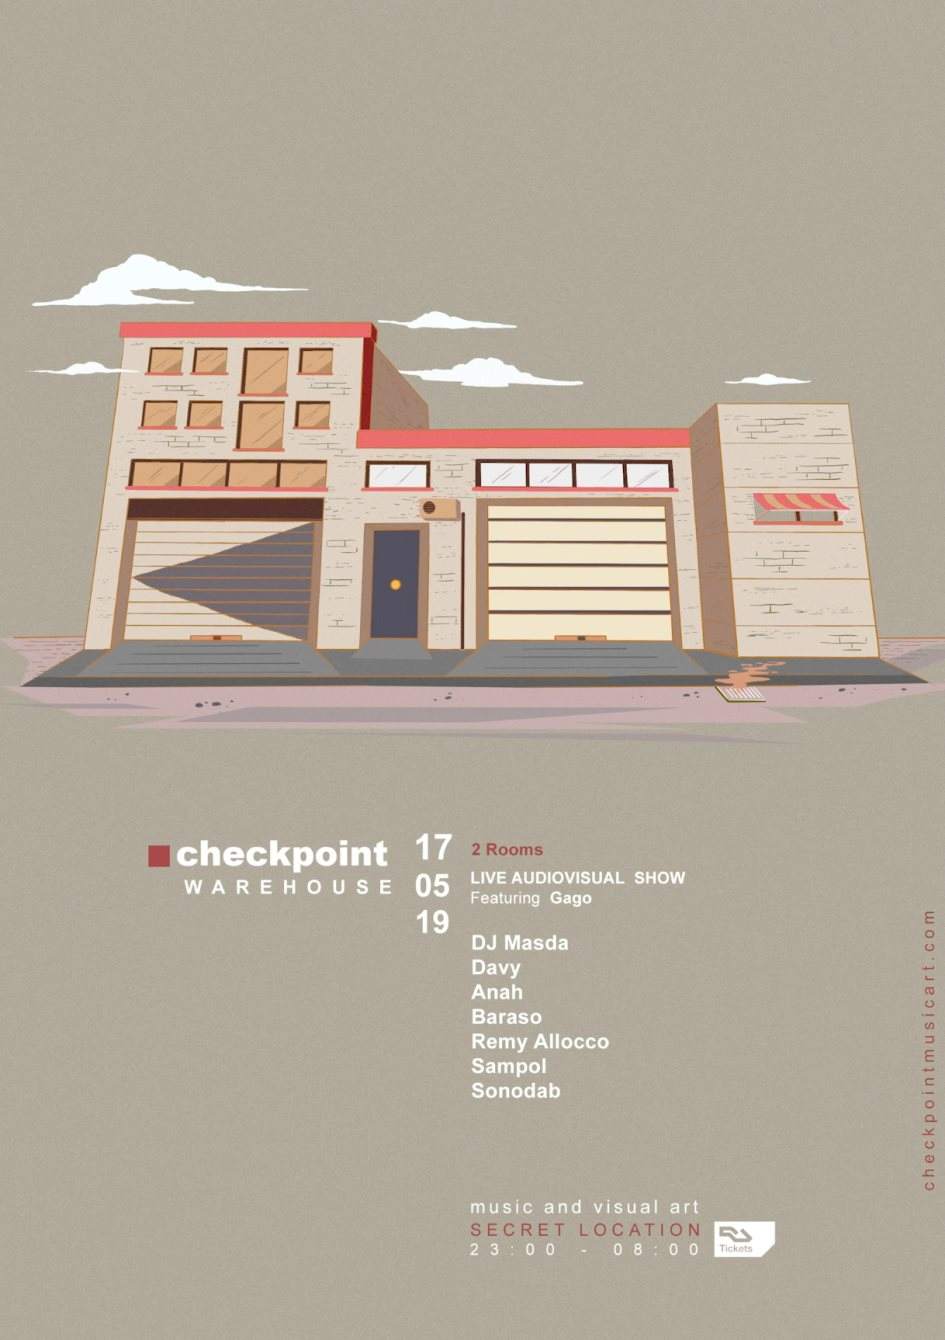 ■ Checkpoint Warehouse 10hours - Página frontal